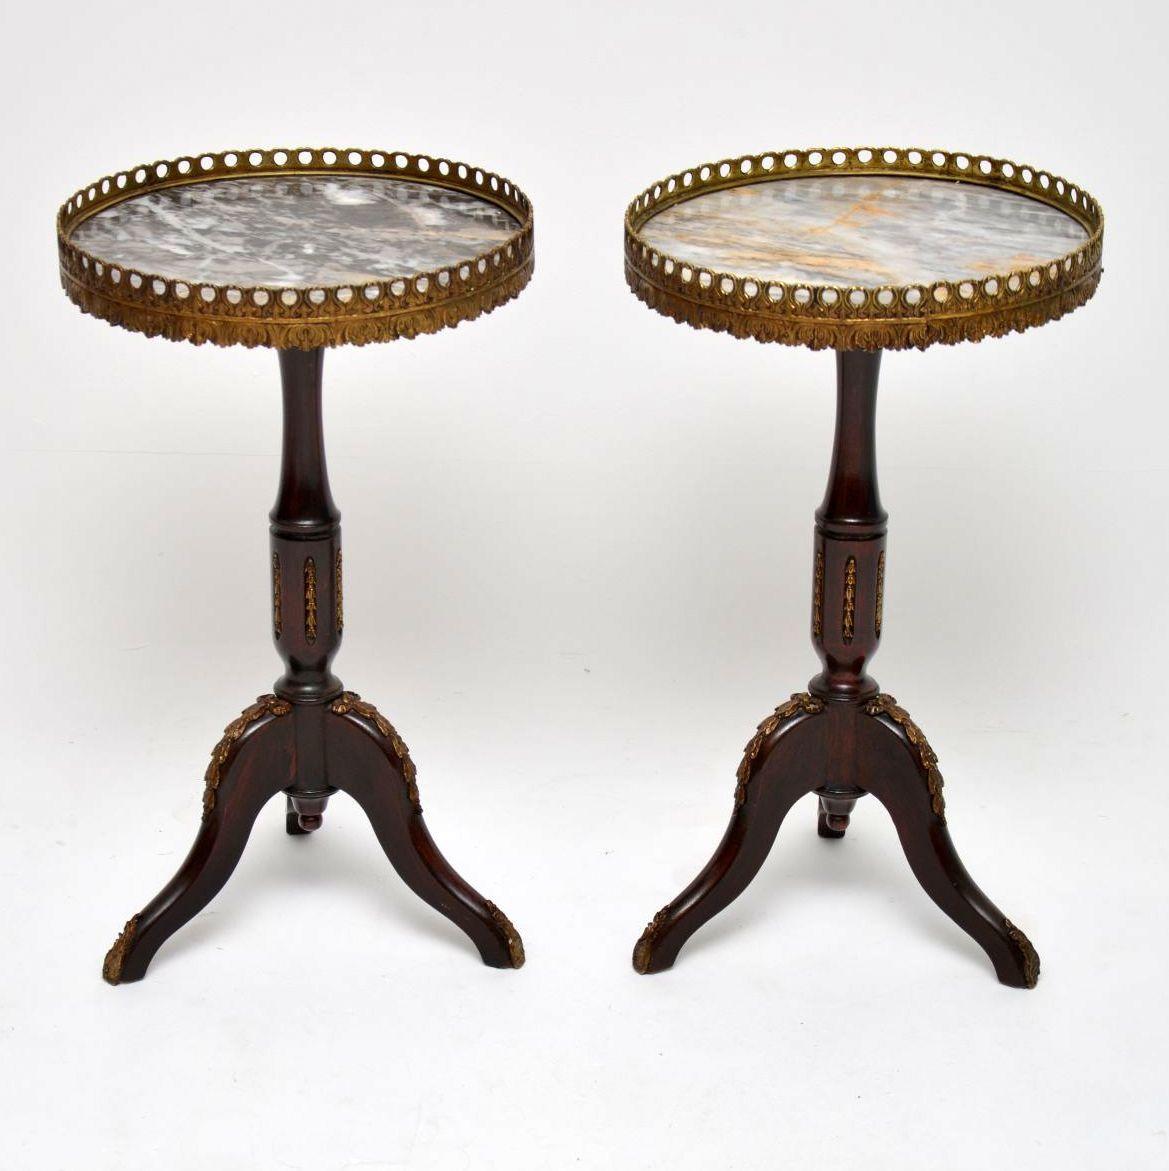 Pair of antique French style marble-top wine tables in good original condition and dating to around the 1930s-1950s period. The marble tops are surrounded by pierced gilt metal galleries and the mahogany bases have plenty more gilt mounts. They are